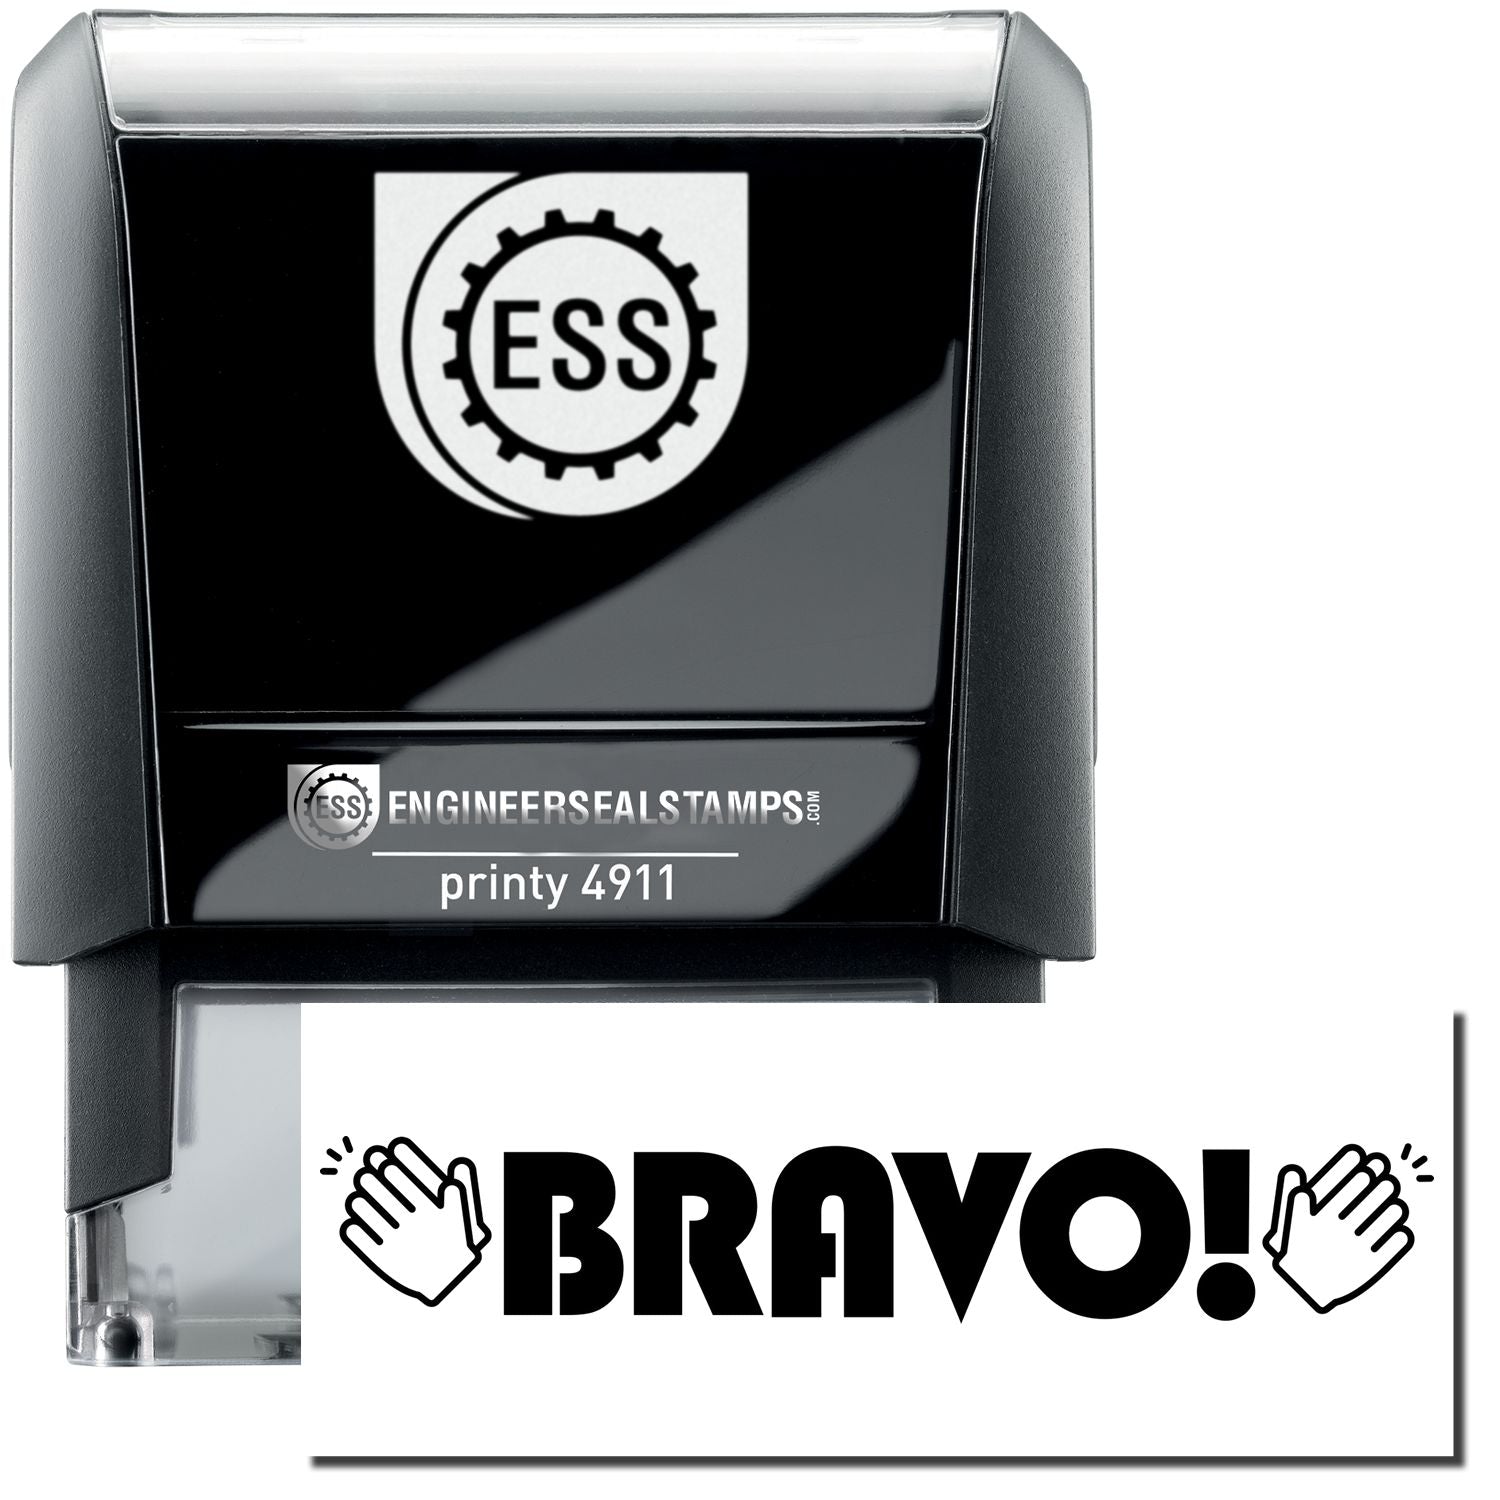 A self-inking stamp with a stamped image showing how the text "BRAVO!" (with clapping hands on either side of the text) is displayed after stamping.